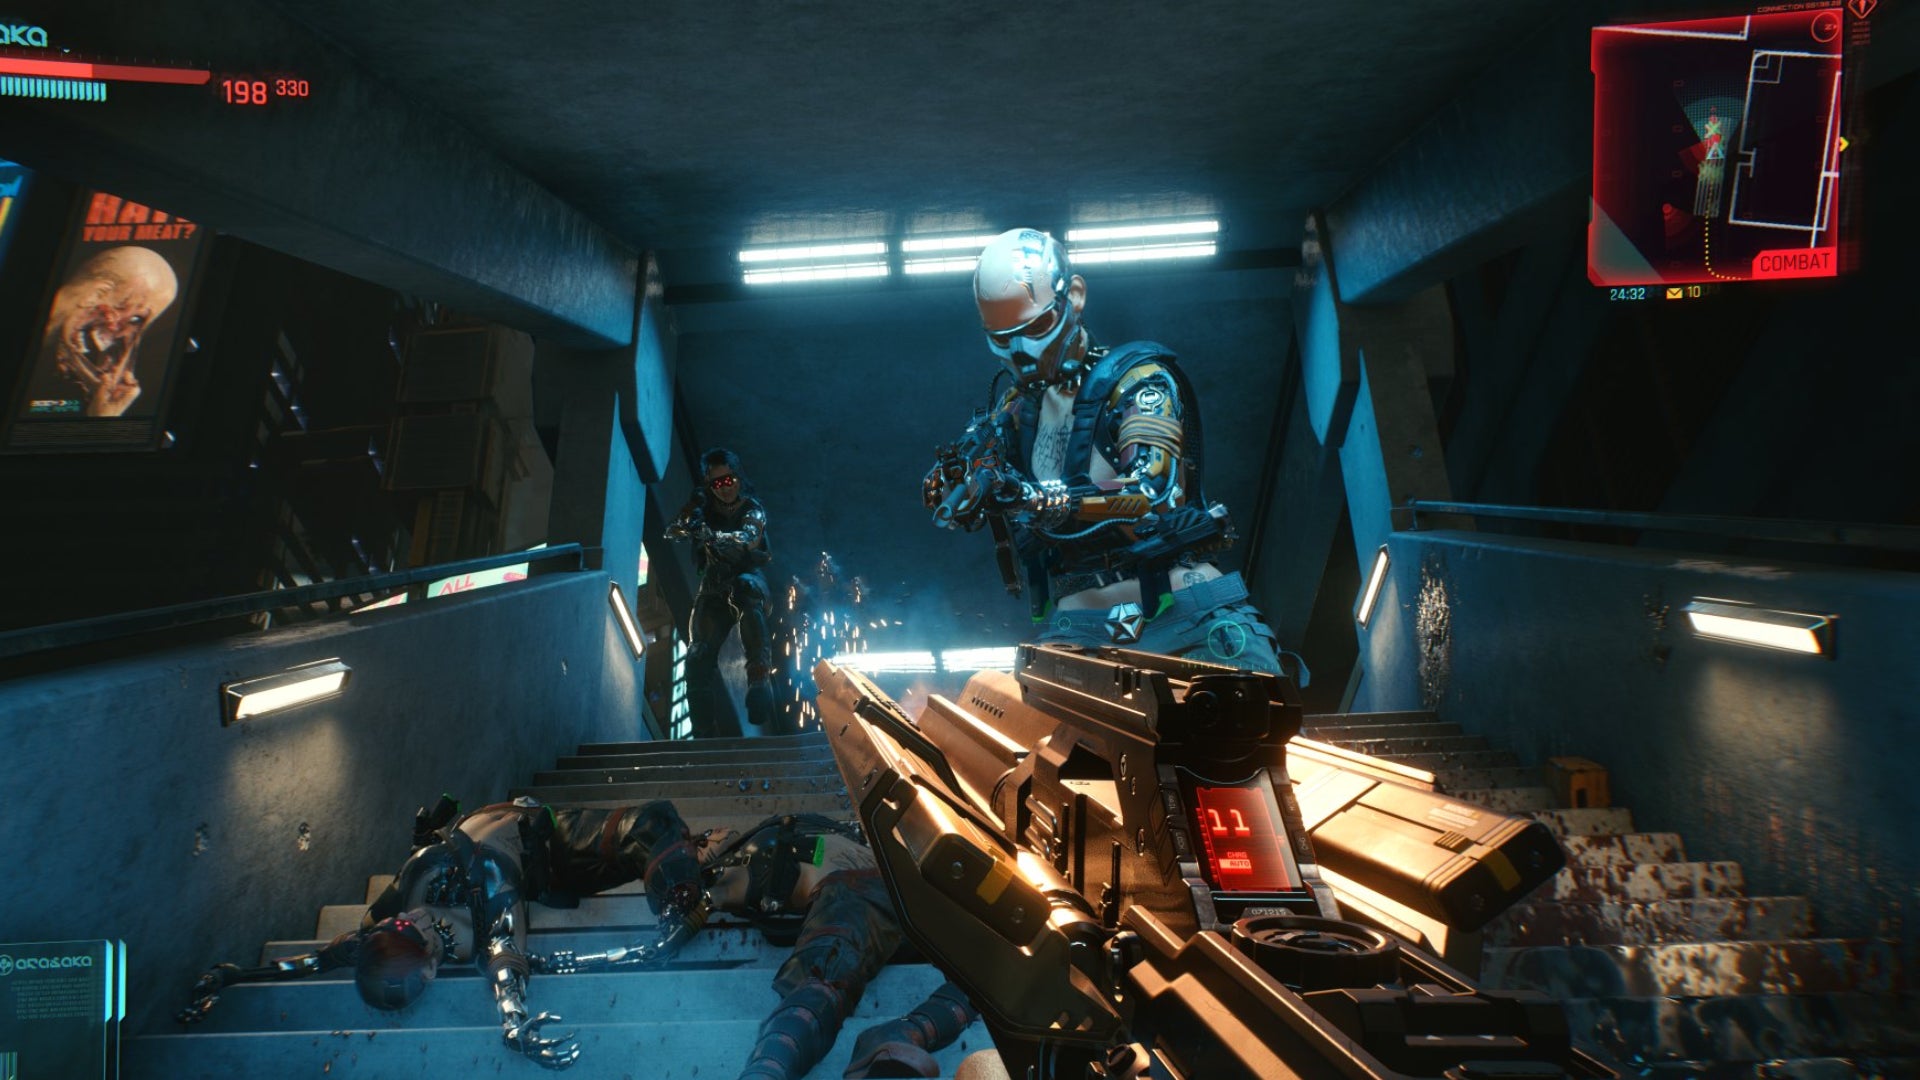 The player in Cyberpunk 2077 fights two gang members on a set of stairs.